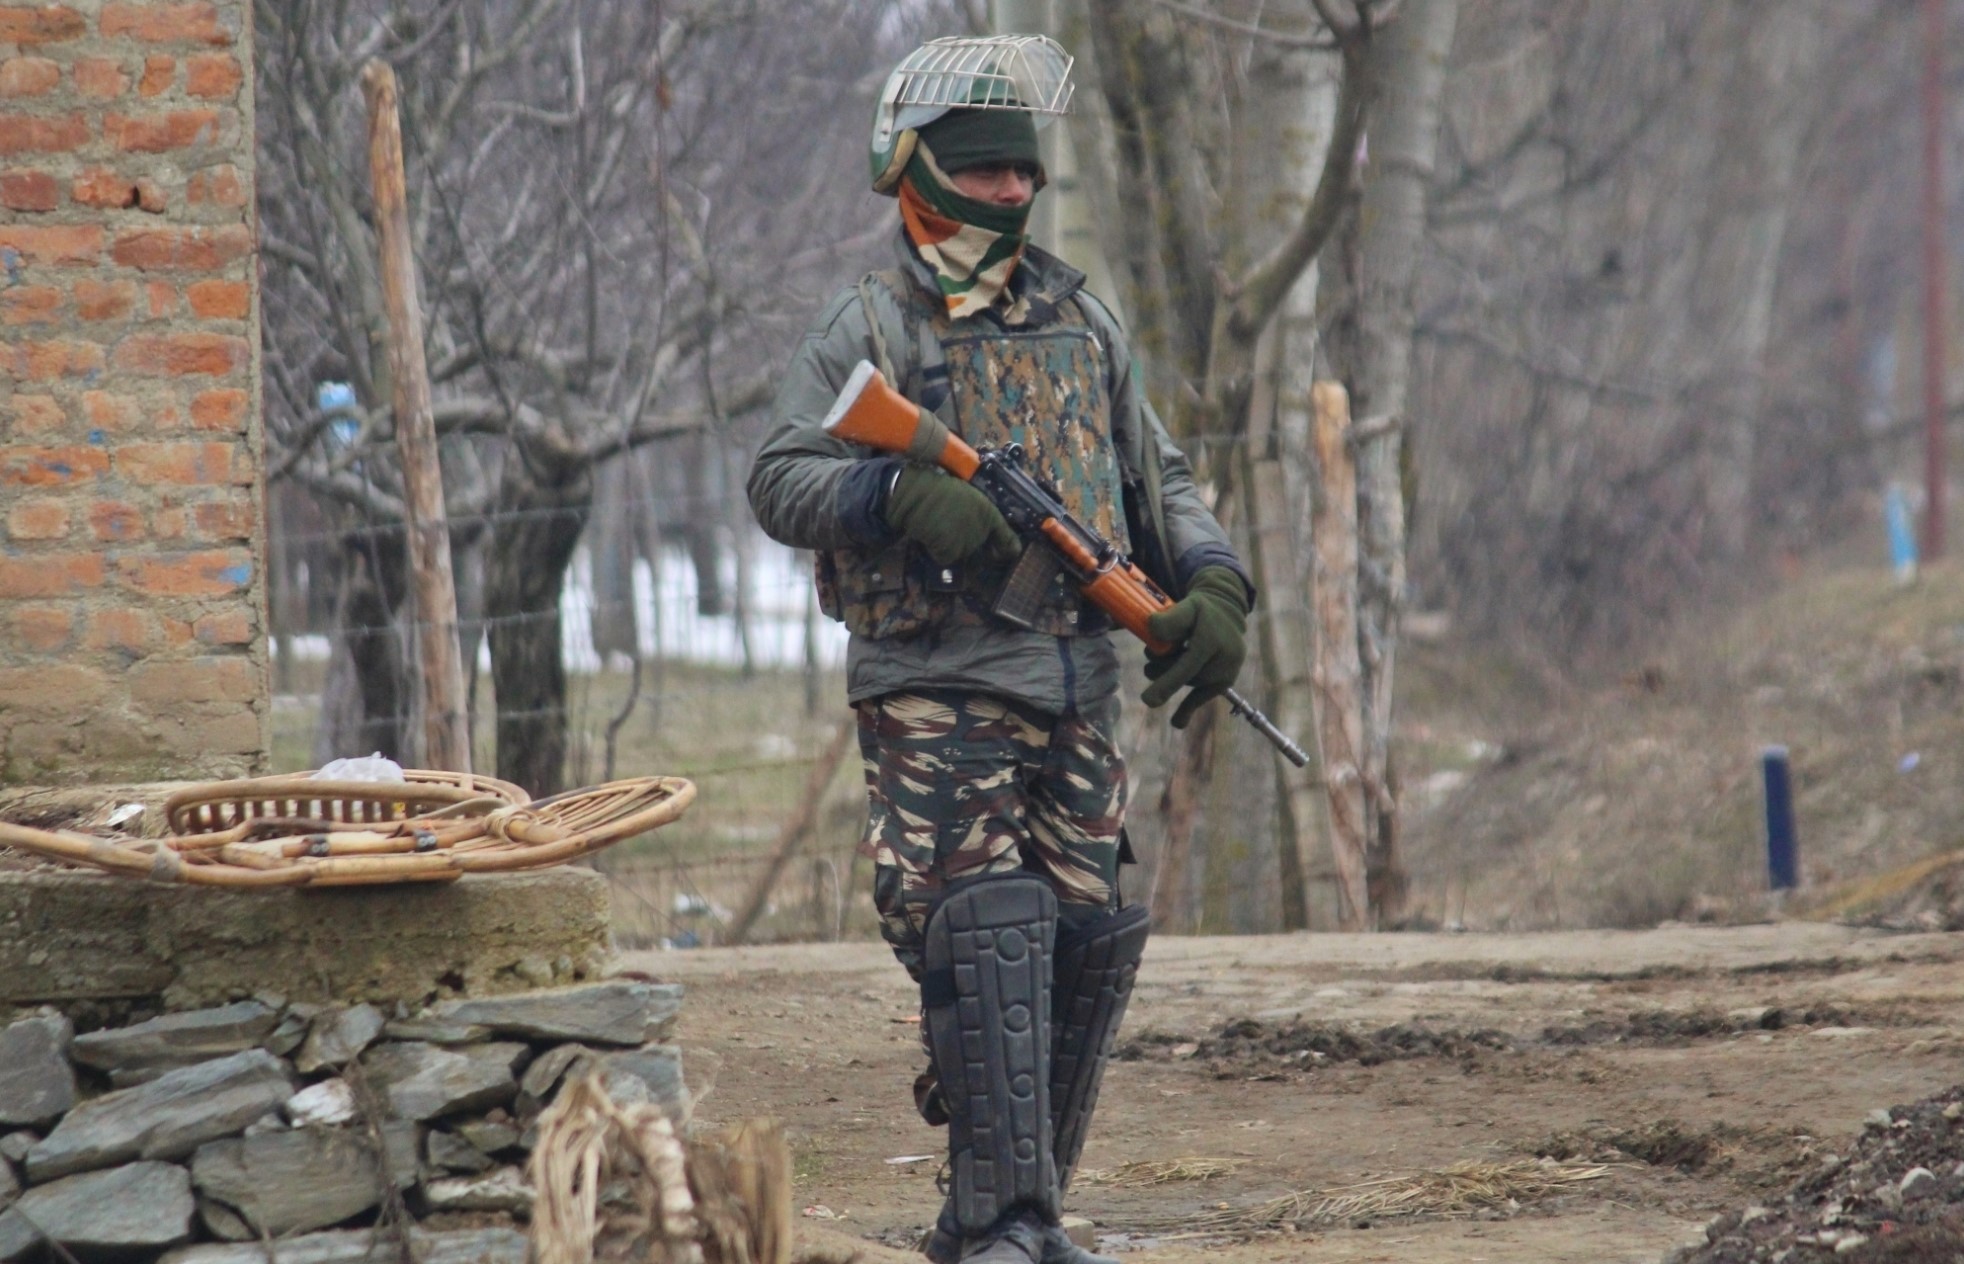 Encounter on in Budgam district: J&K Police